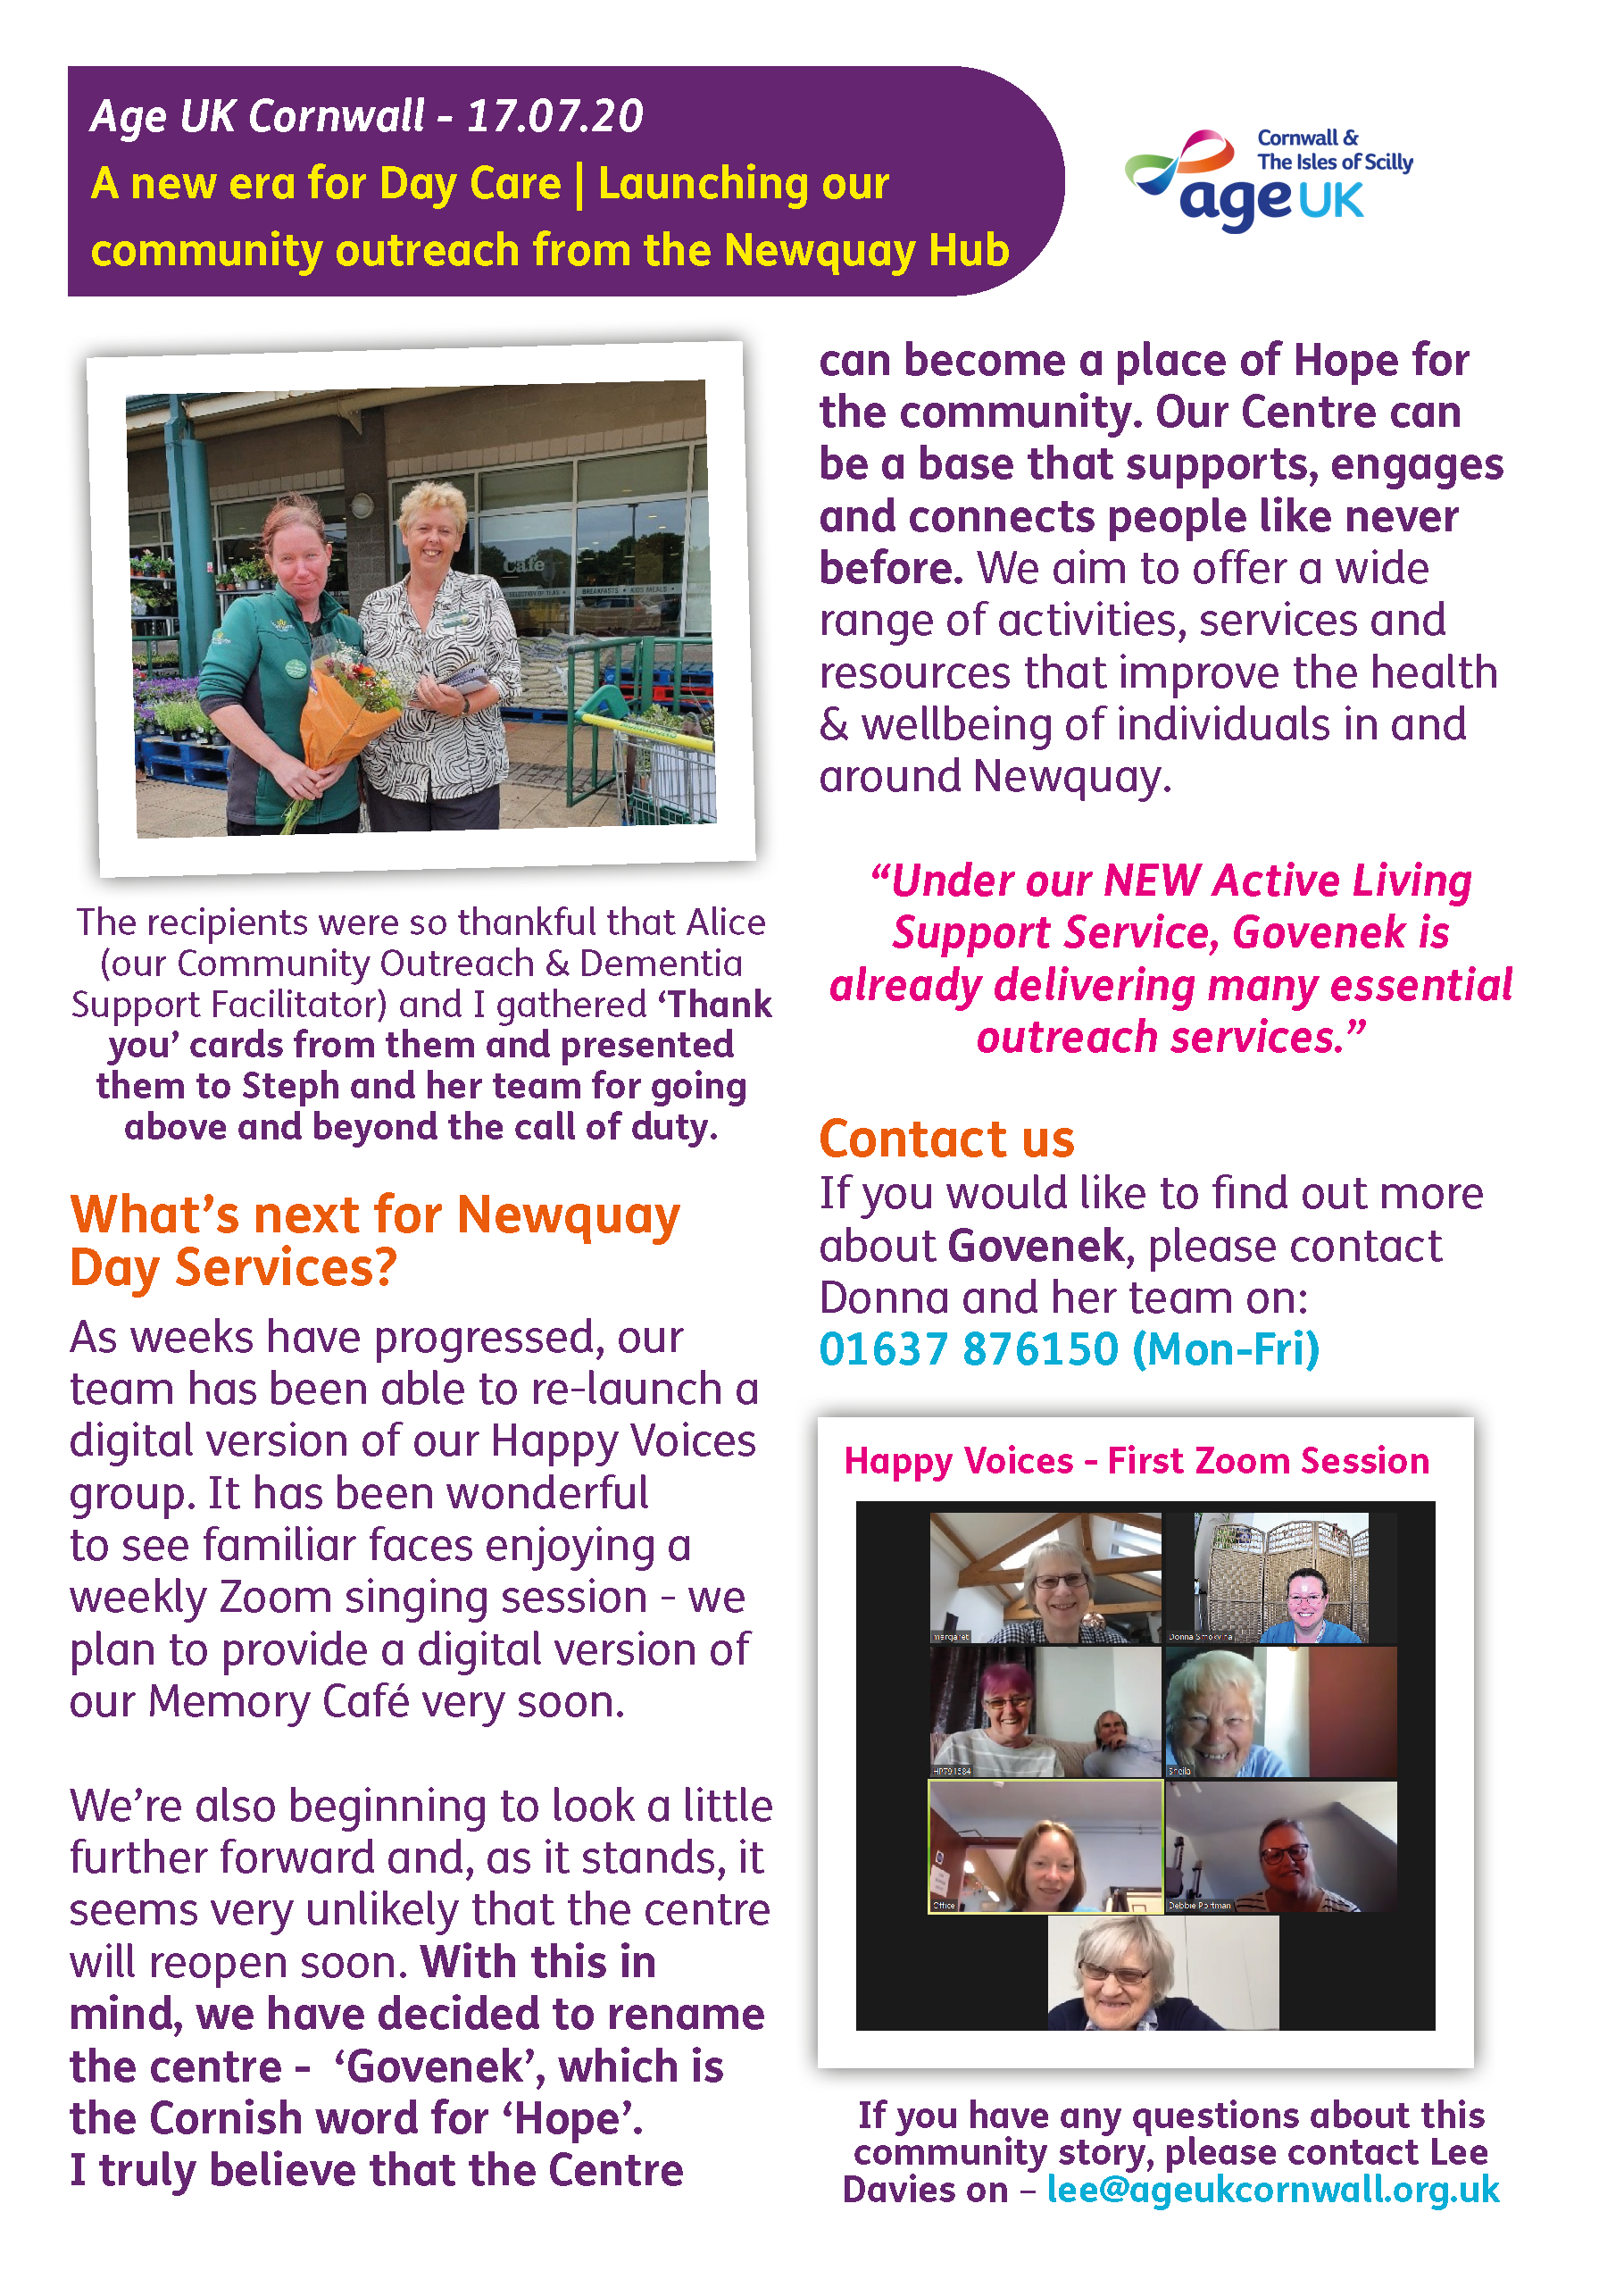 170720 - A new era for Day Care - Community outreach and support (Newquay Community Hub - A new era)_Page_3.png